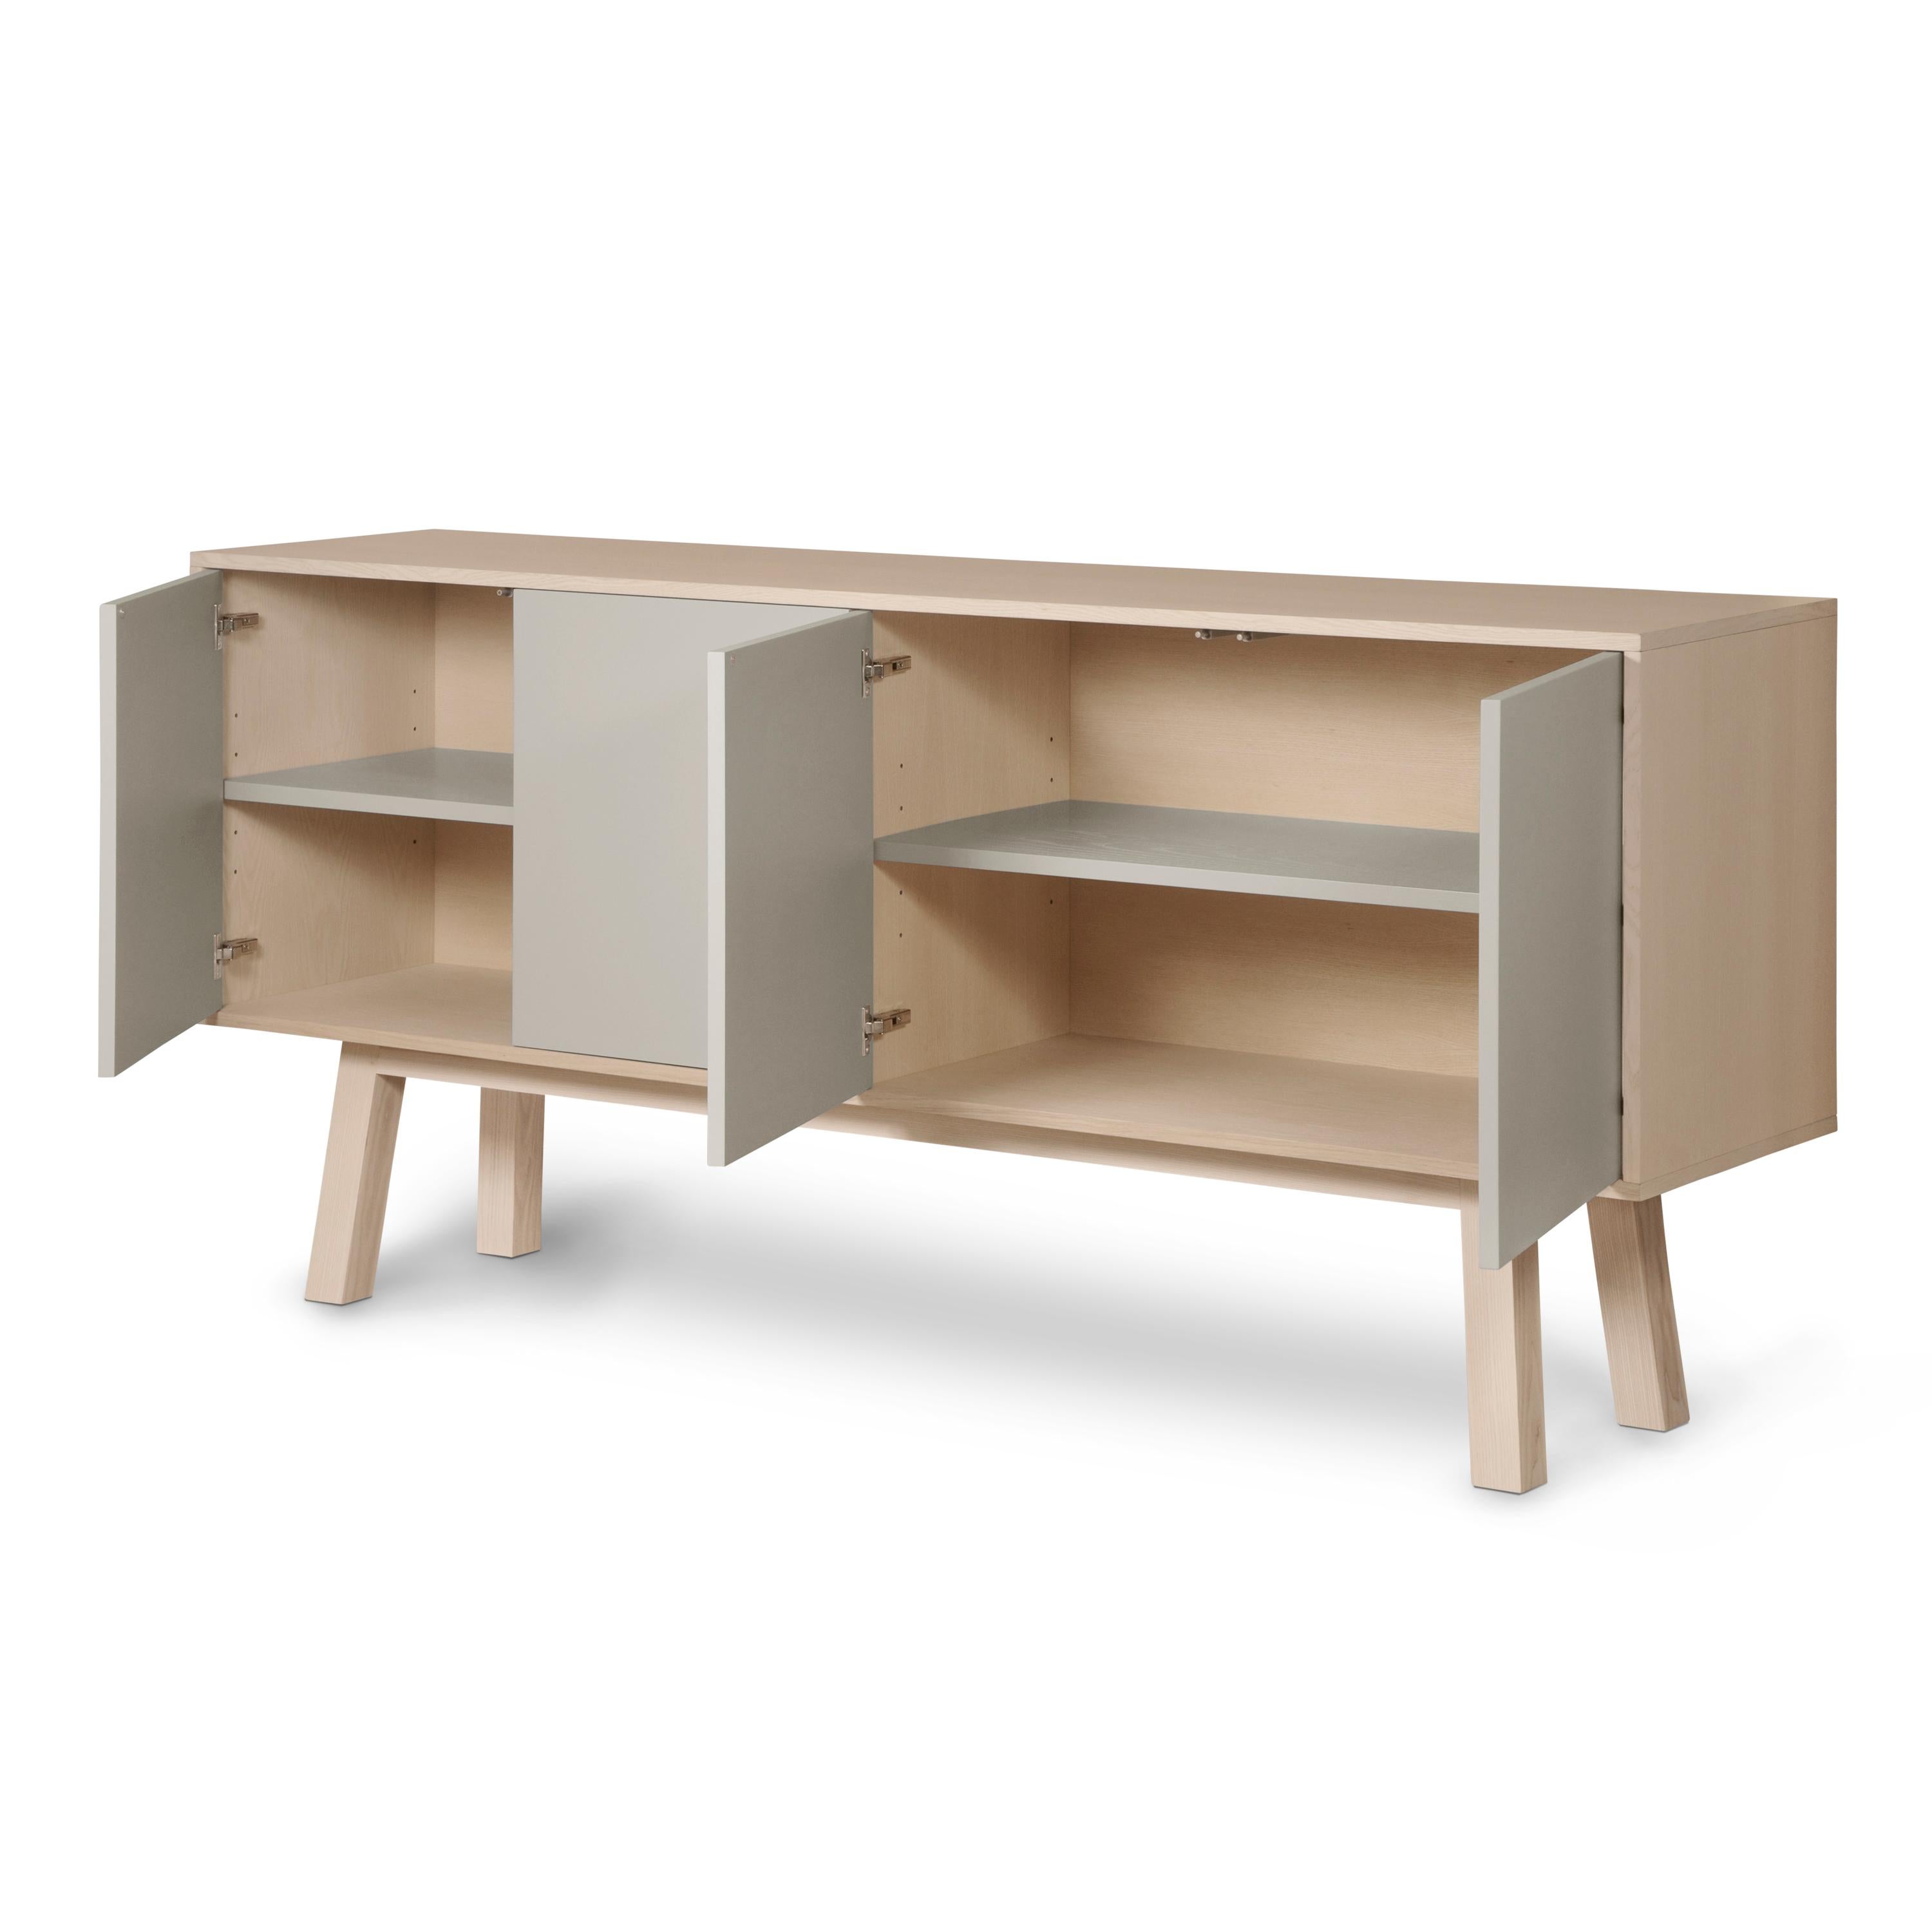 Ash Light Grey Sideboard Kube in Wood, Design Eric Gizard, Paris Made in France For Sale